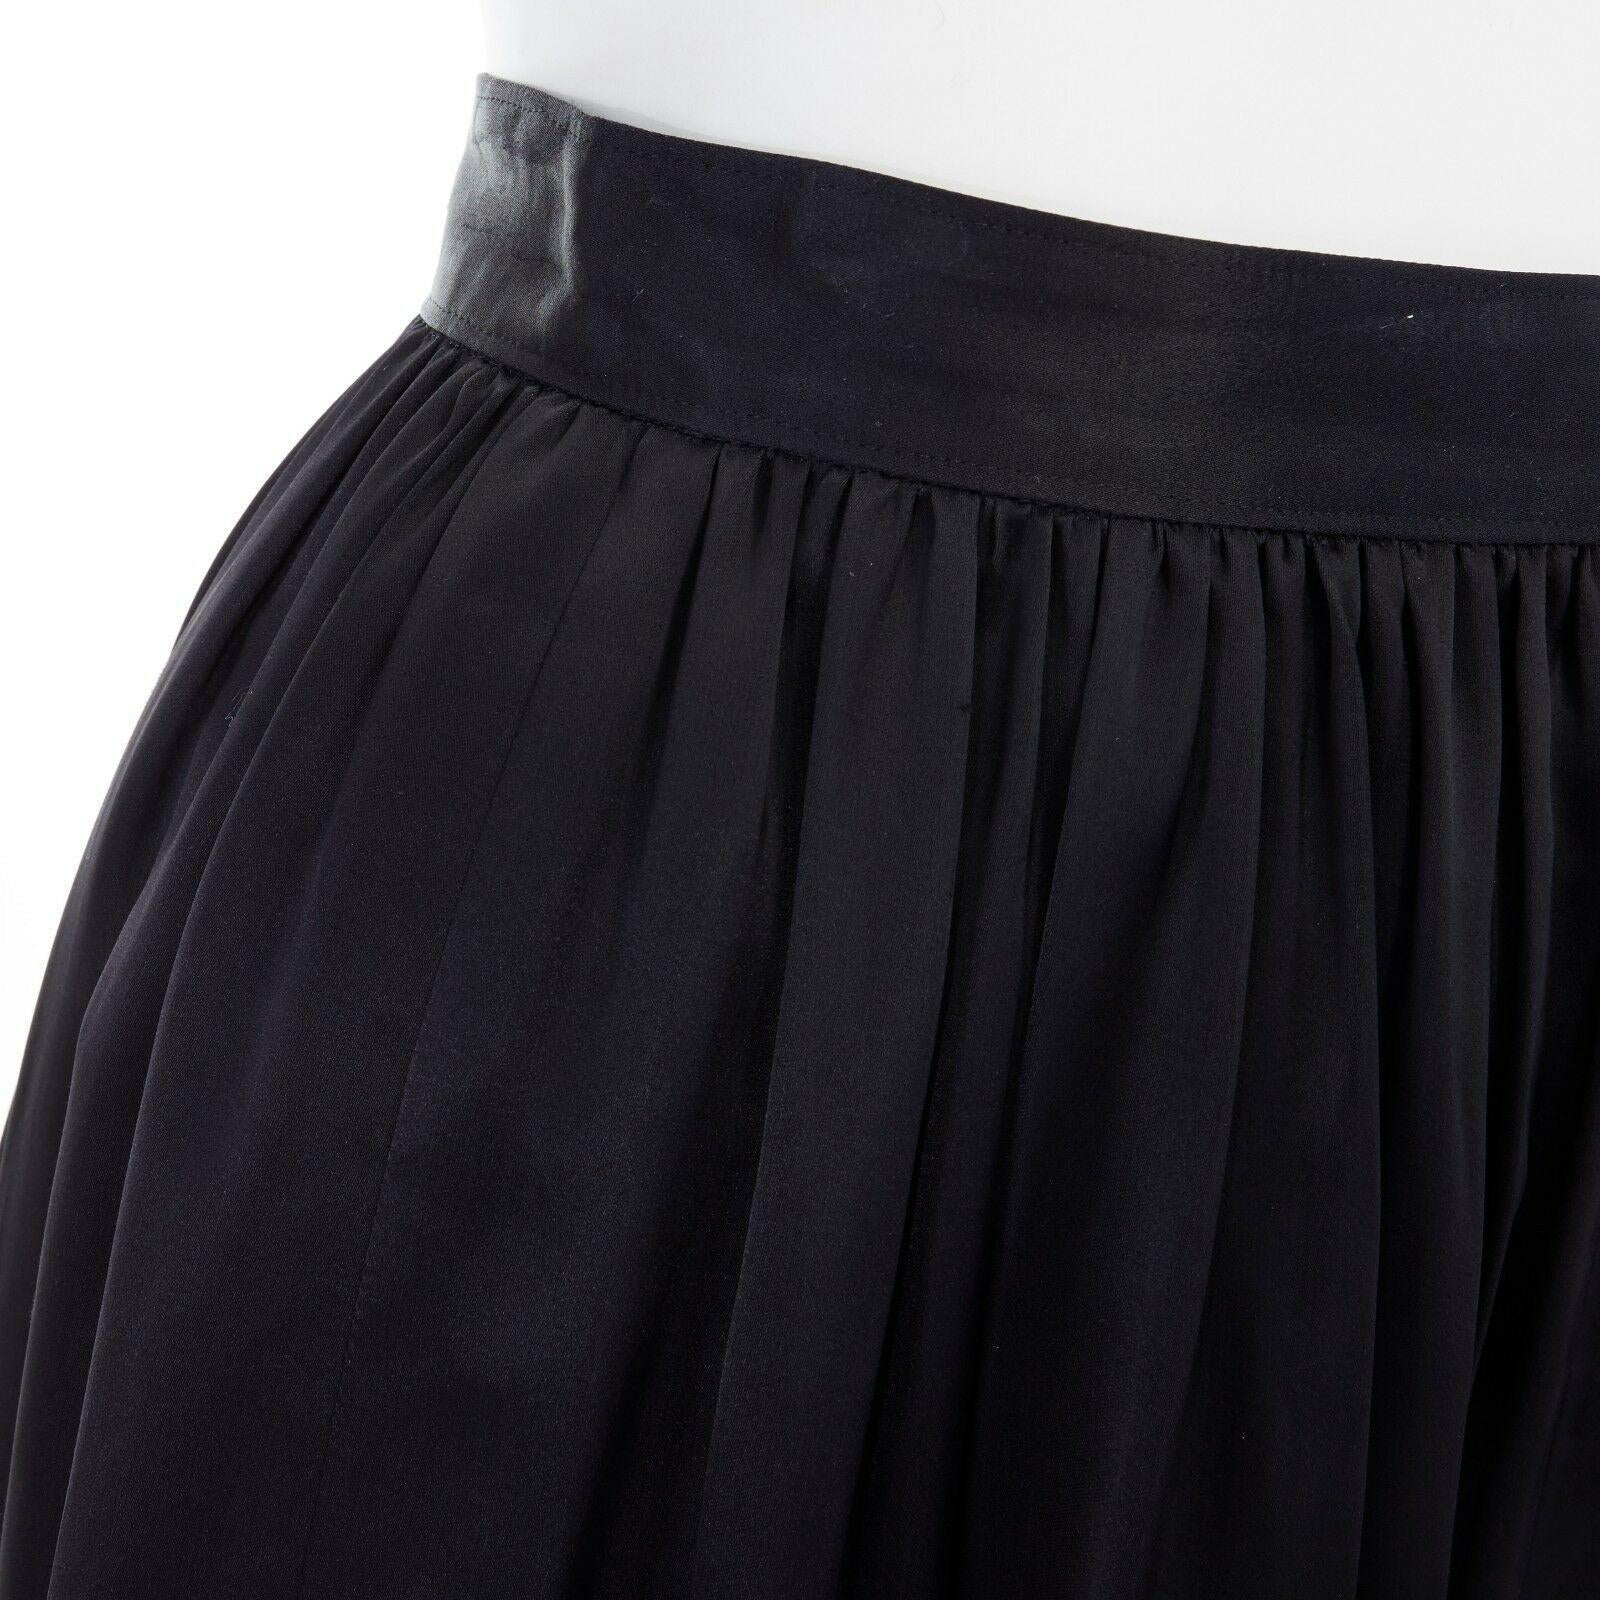 COMME DES GARCONS AD1989 black rayon draped knee length skirt S 24